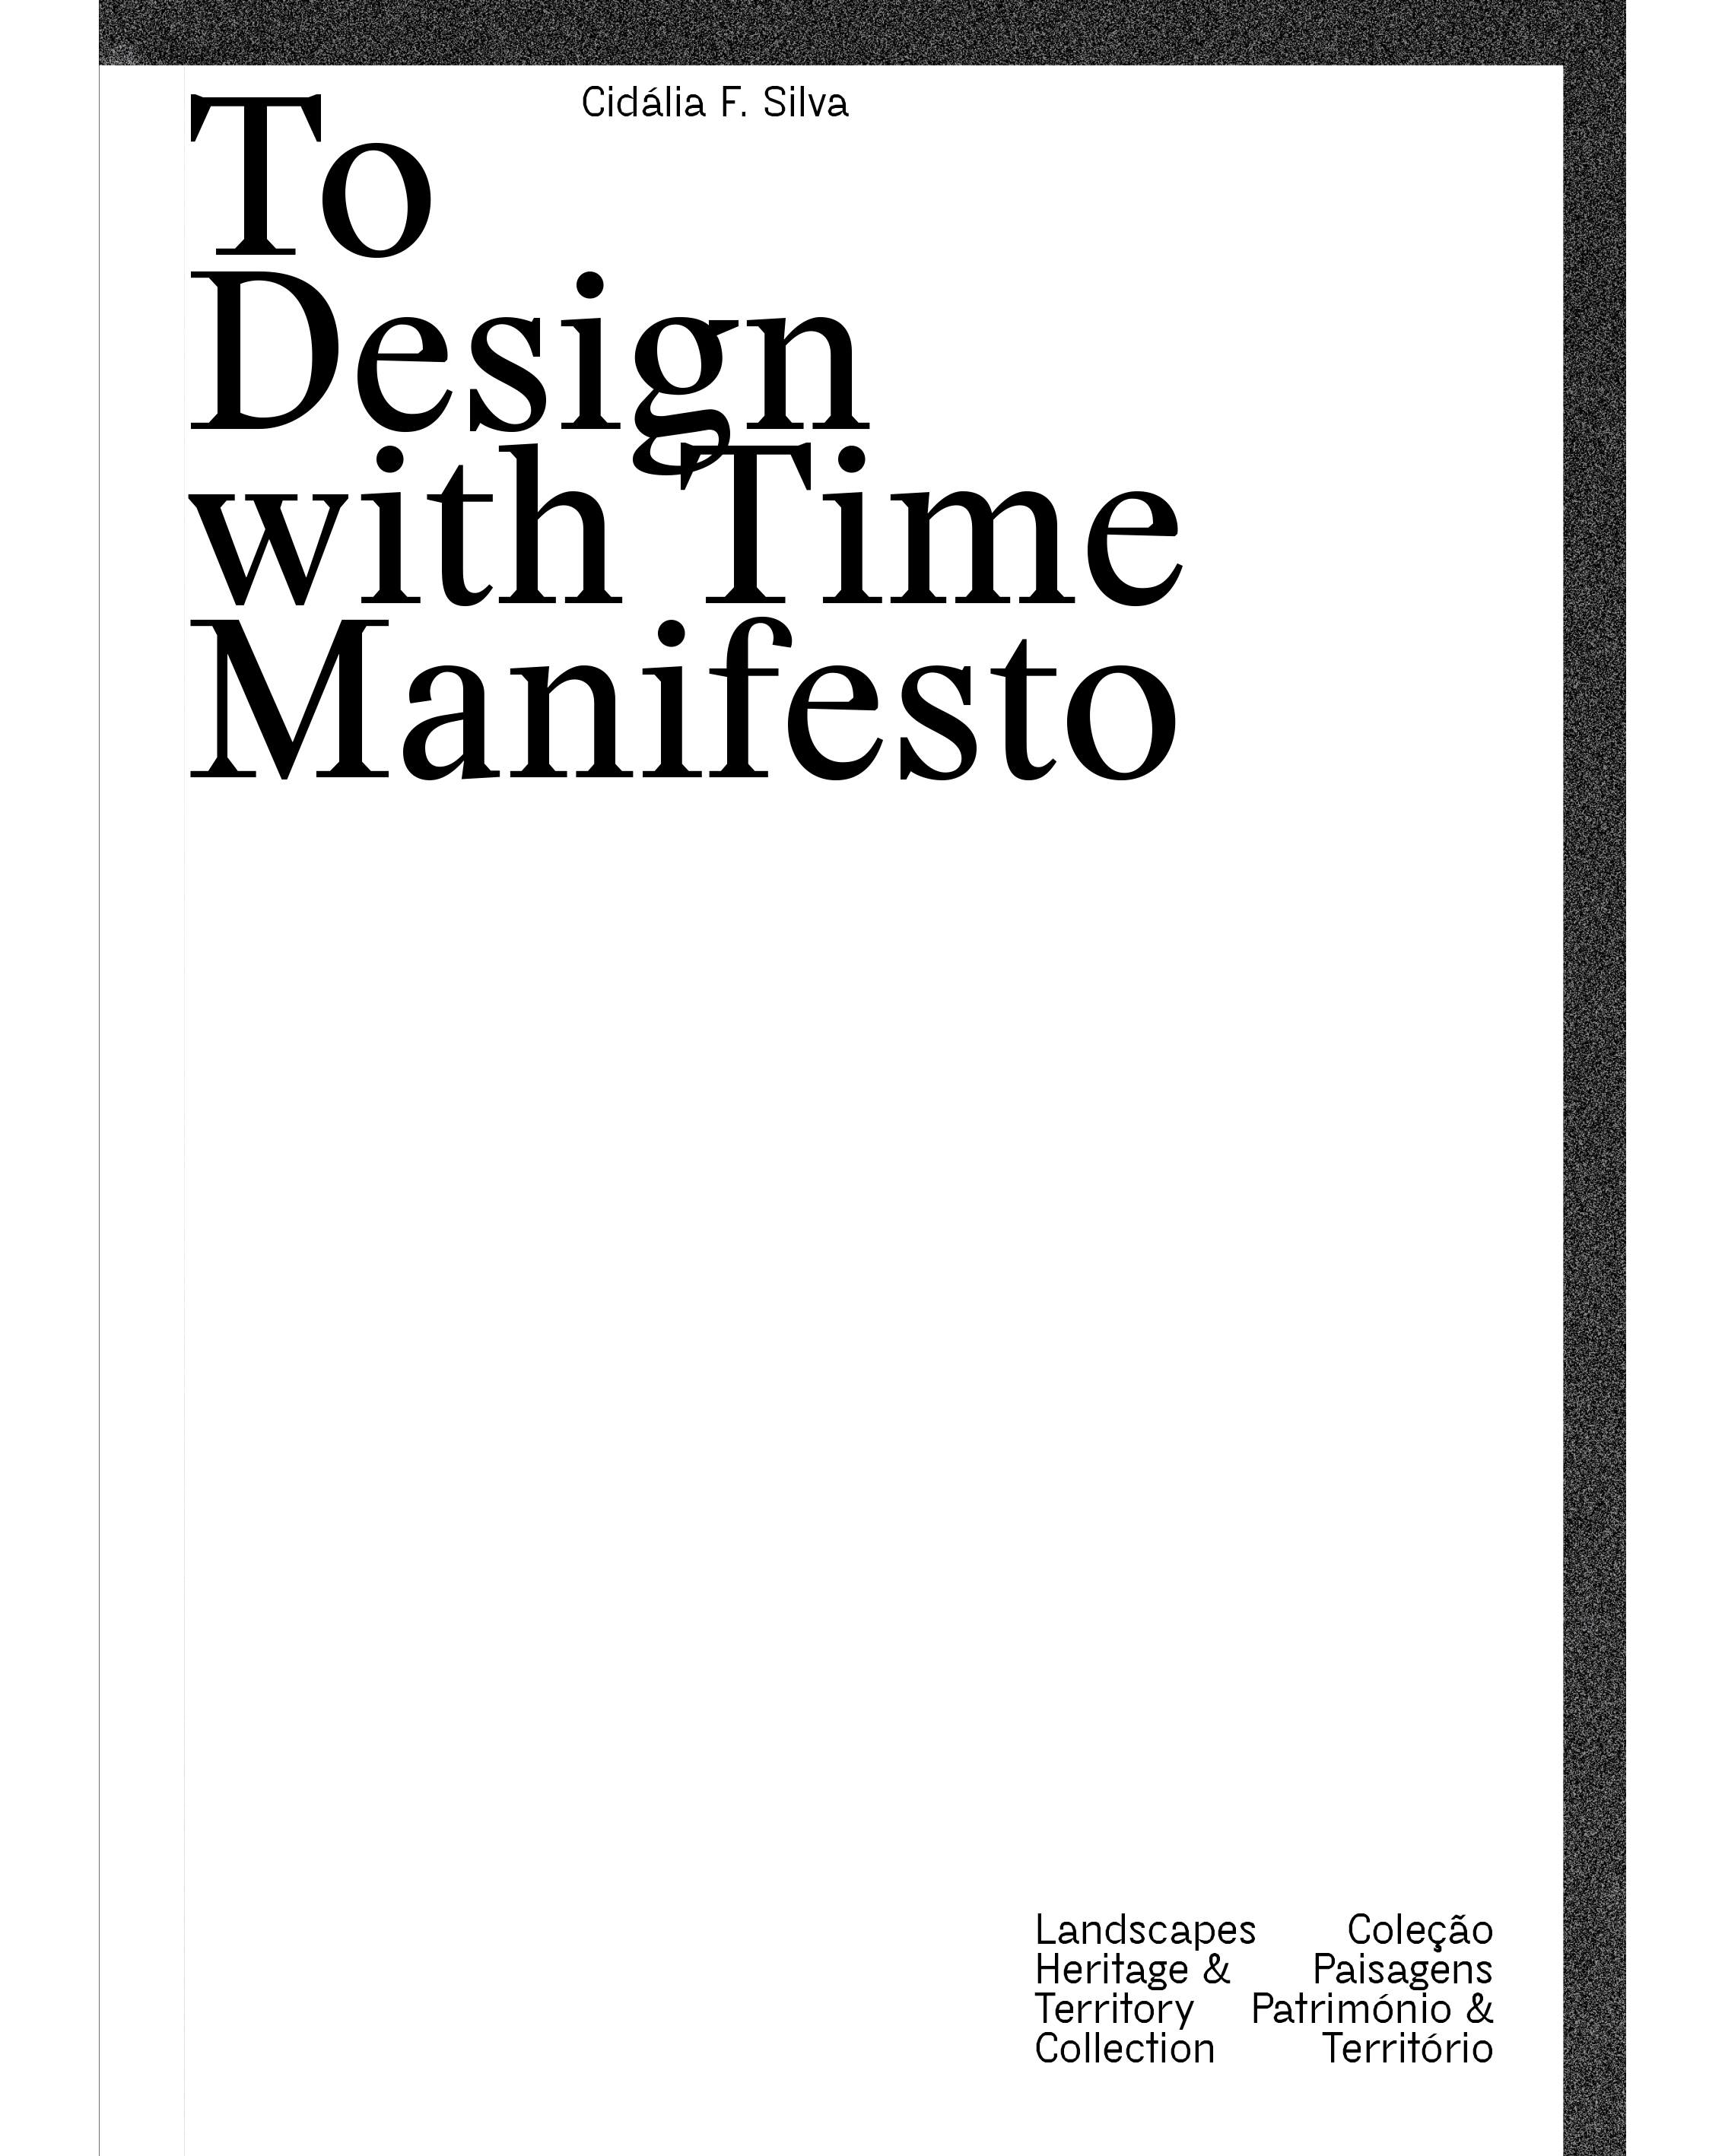 2018 - To Design with Time Manifesto image